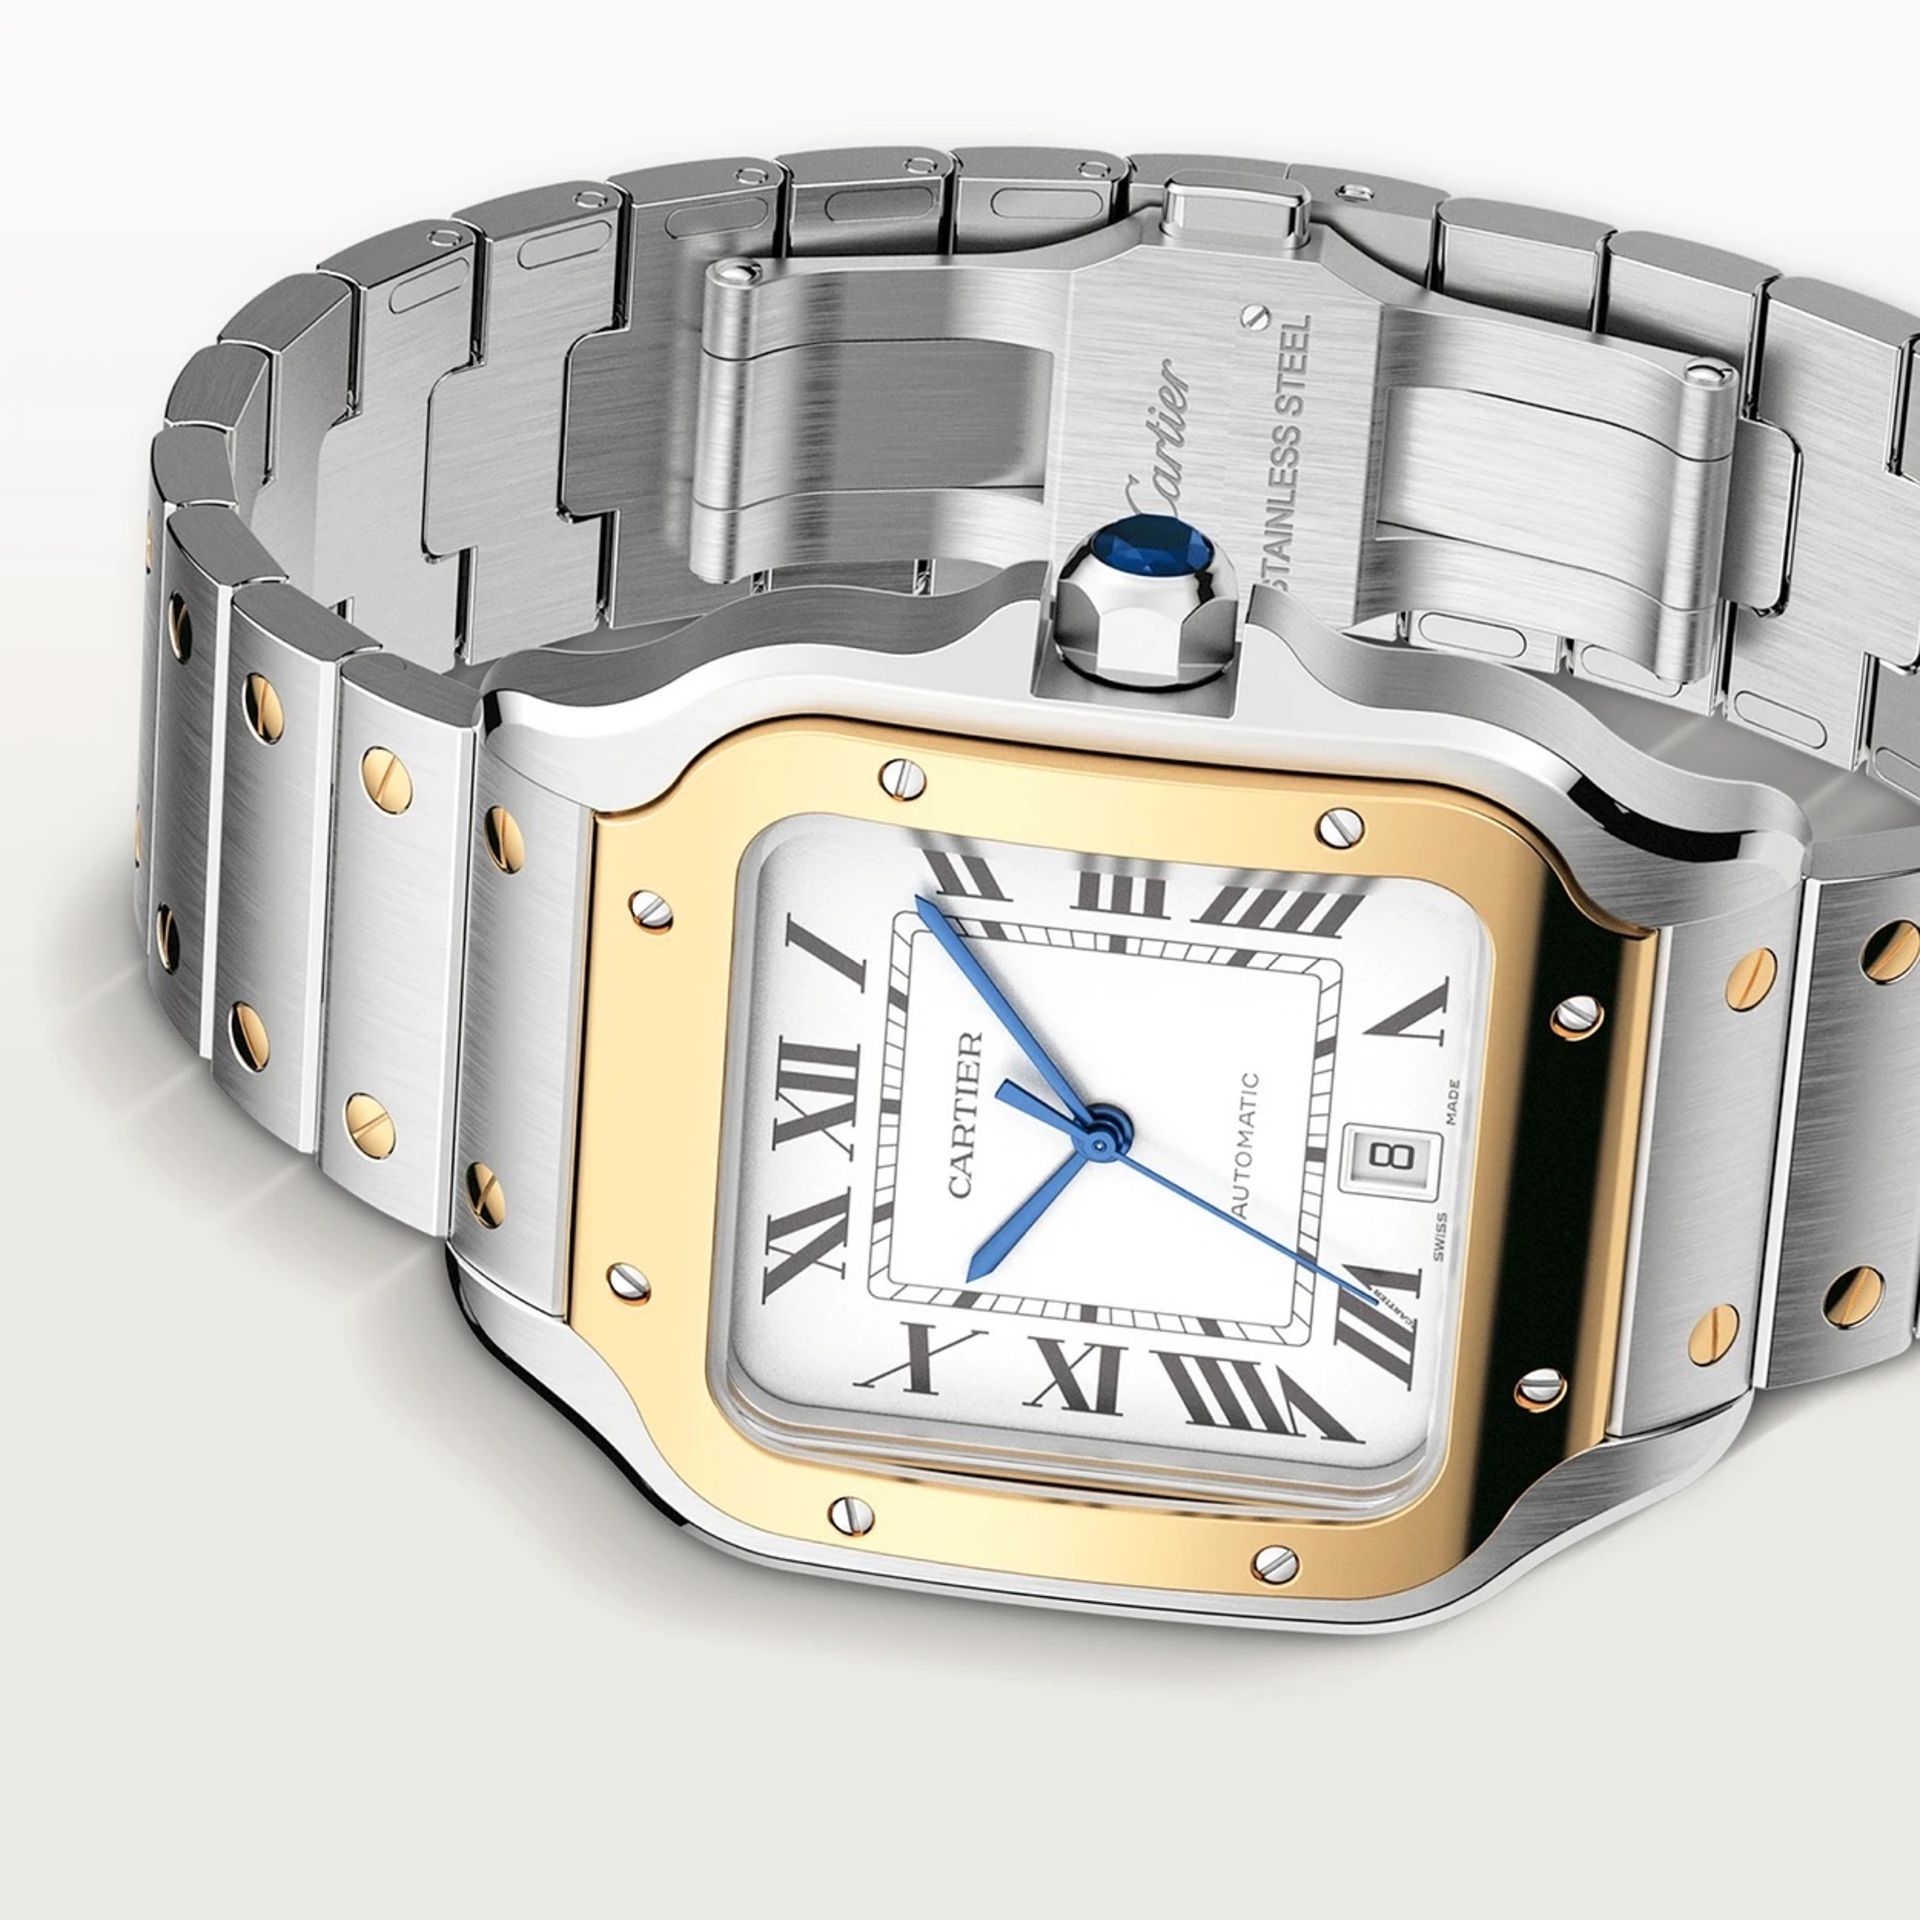 Cartier Santos De Cartier Large Model - Automatic Movement - Yellow Gold Stainless Steel White Dial - Image 5 of 12